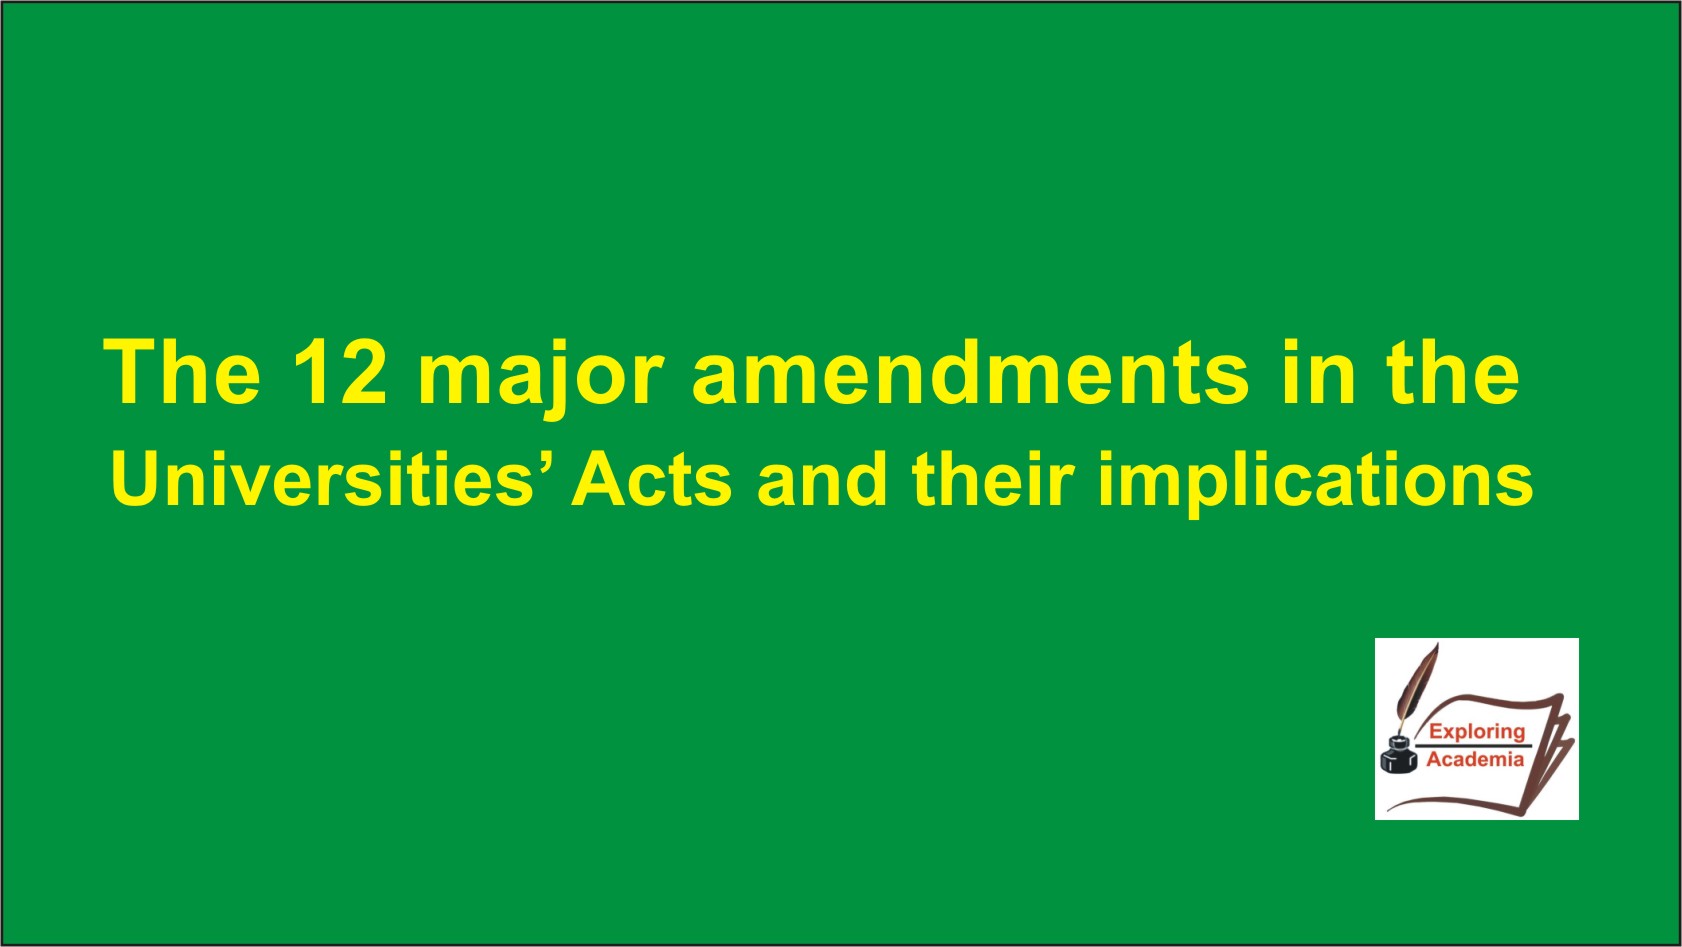 the 12 major amendments in the Universities Acts and the their imlications(1)